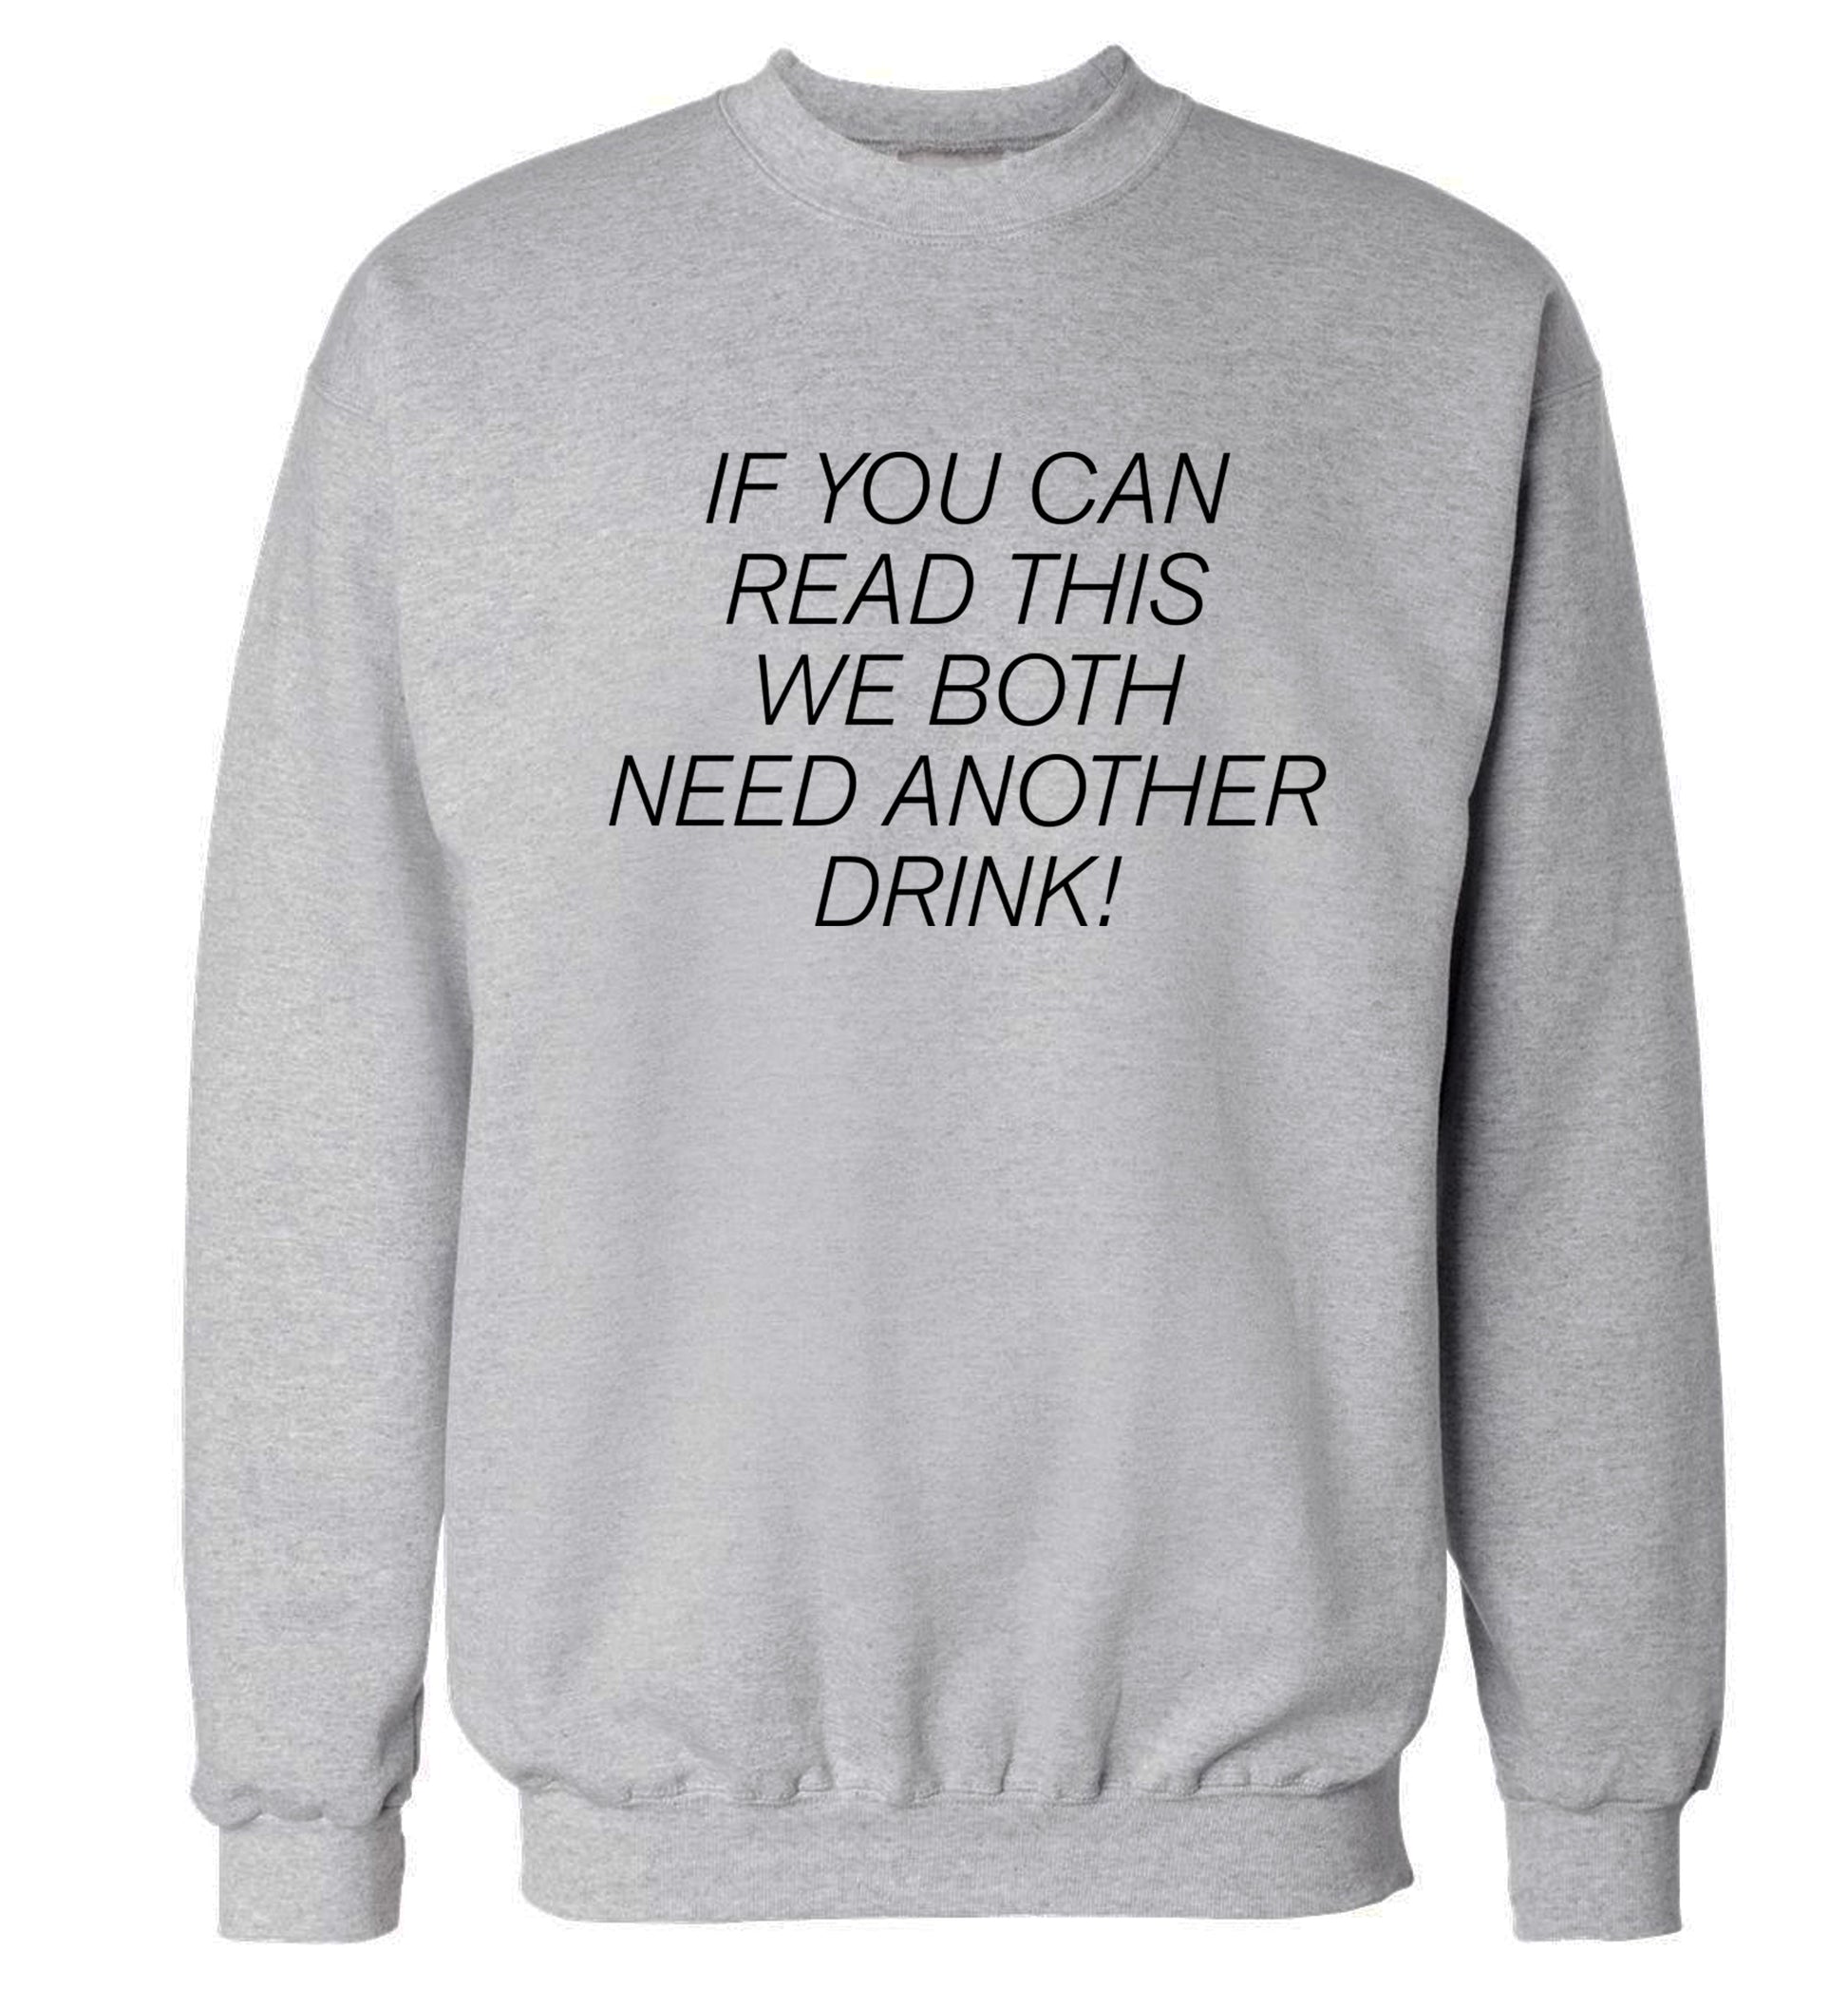 If you can read this we both need another drink! Adult's unisex grey Sweater 2XL